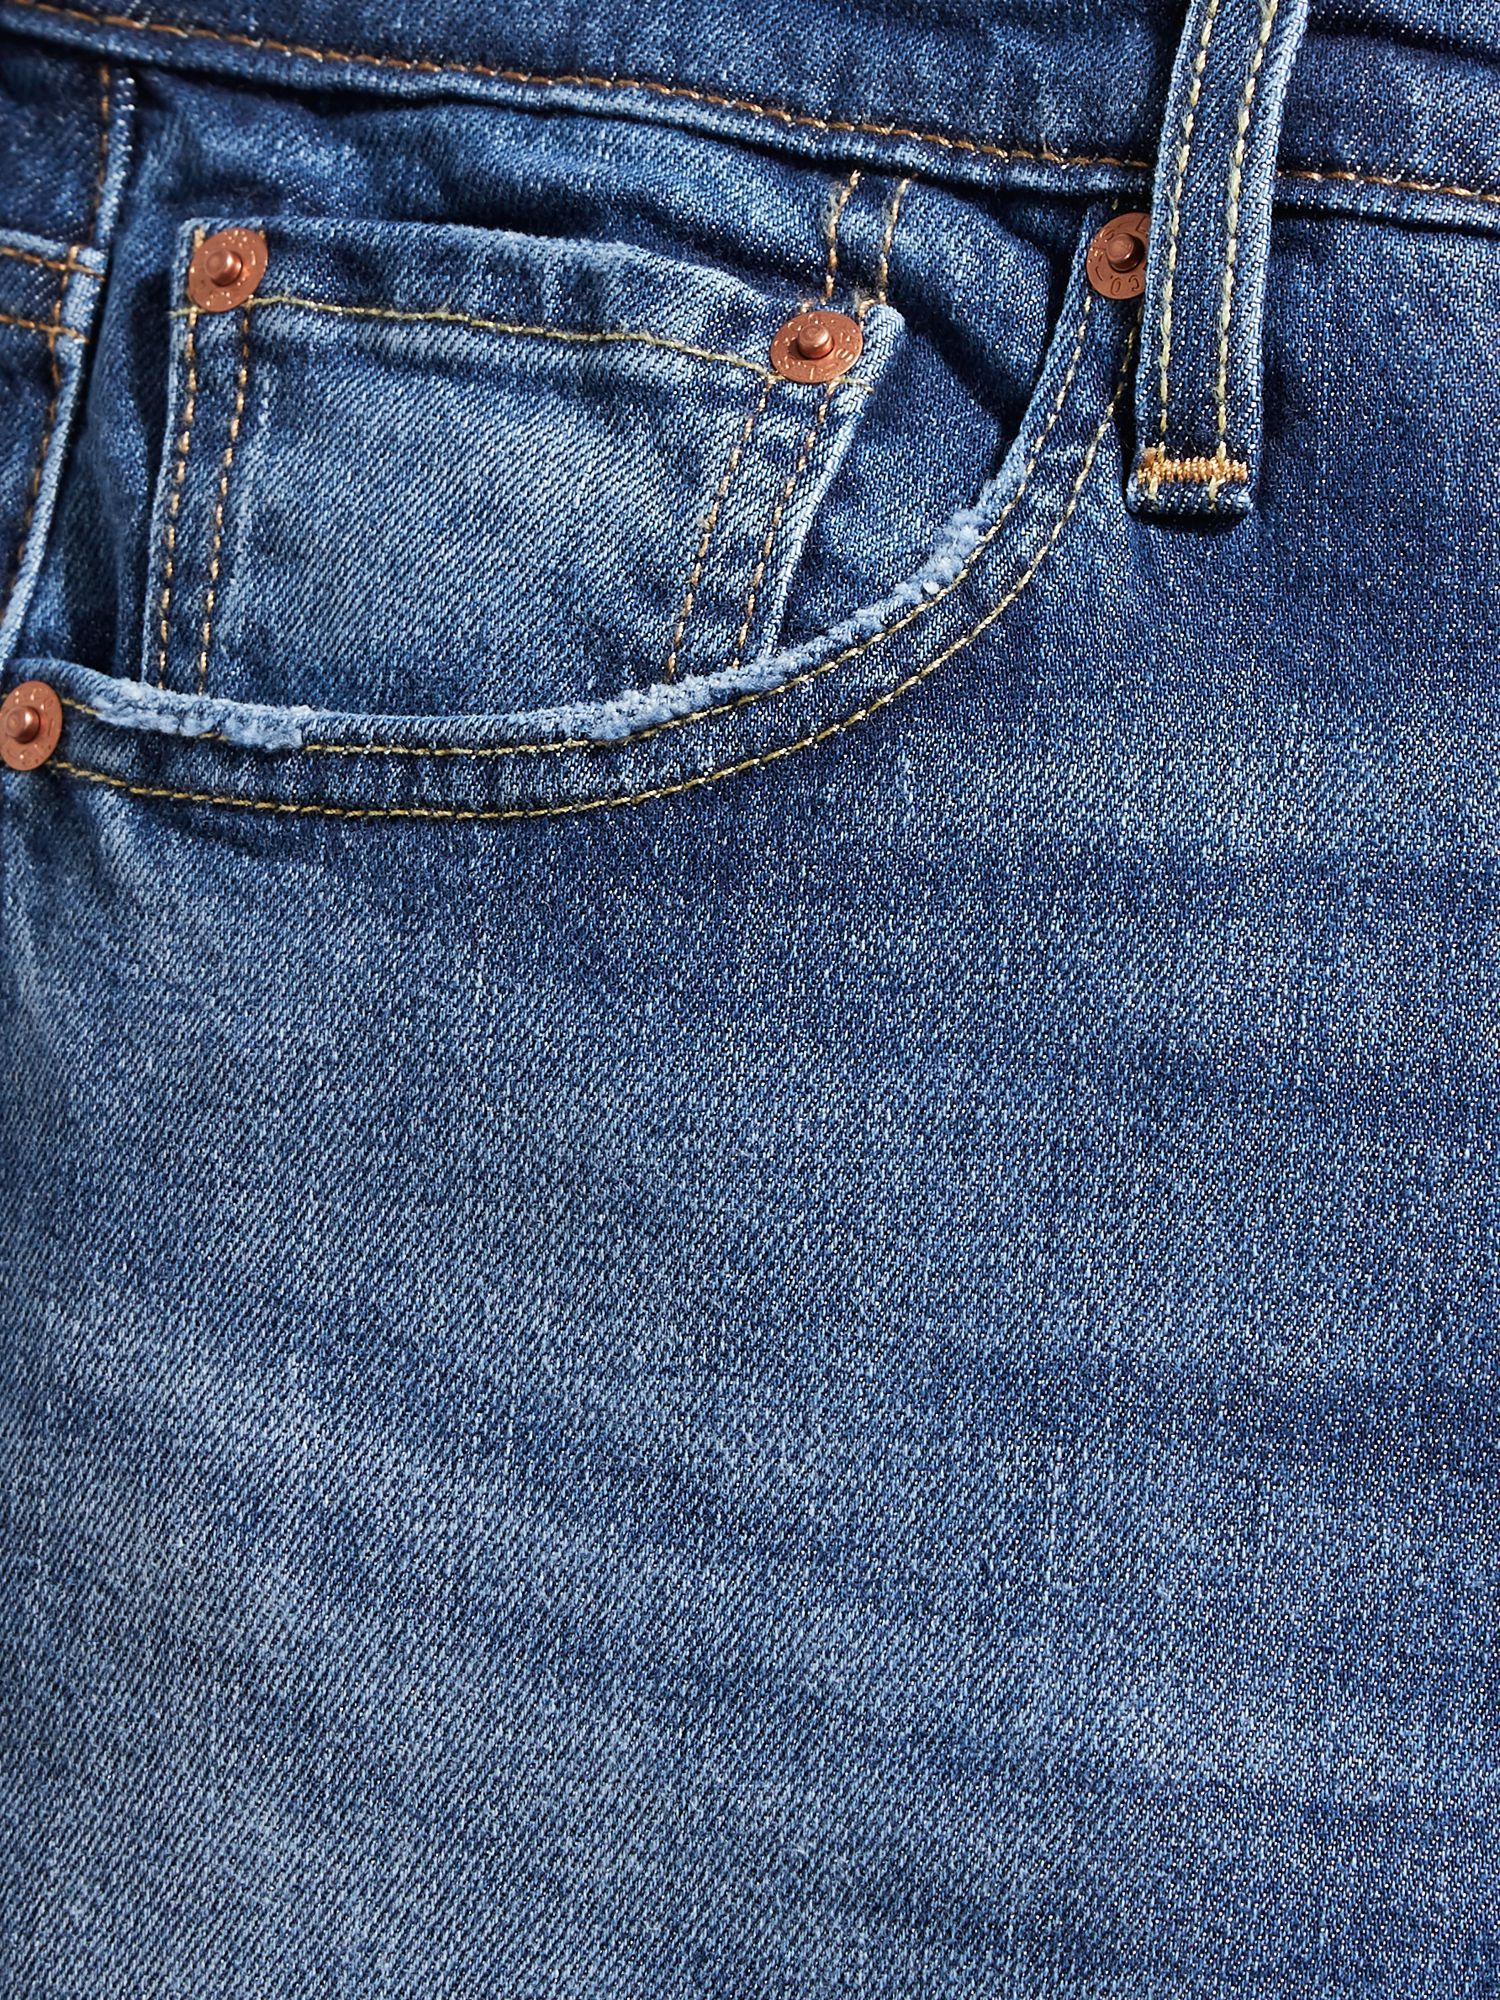 Levi's 502 Tapered Fit Jeans, Smoke Stacked Adv at John Lewis & Partners